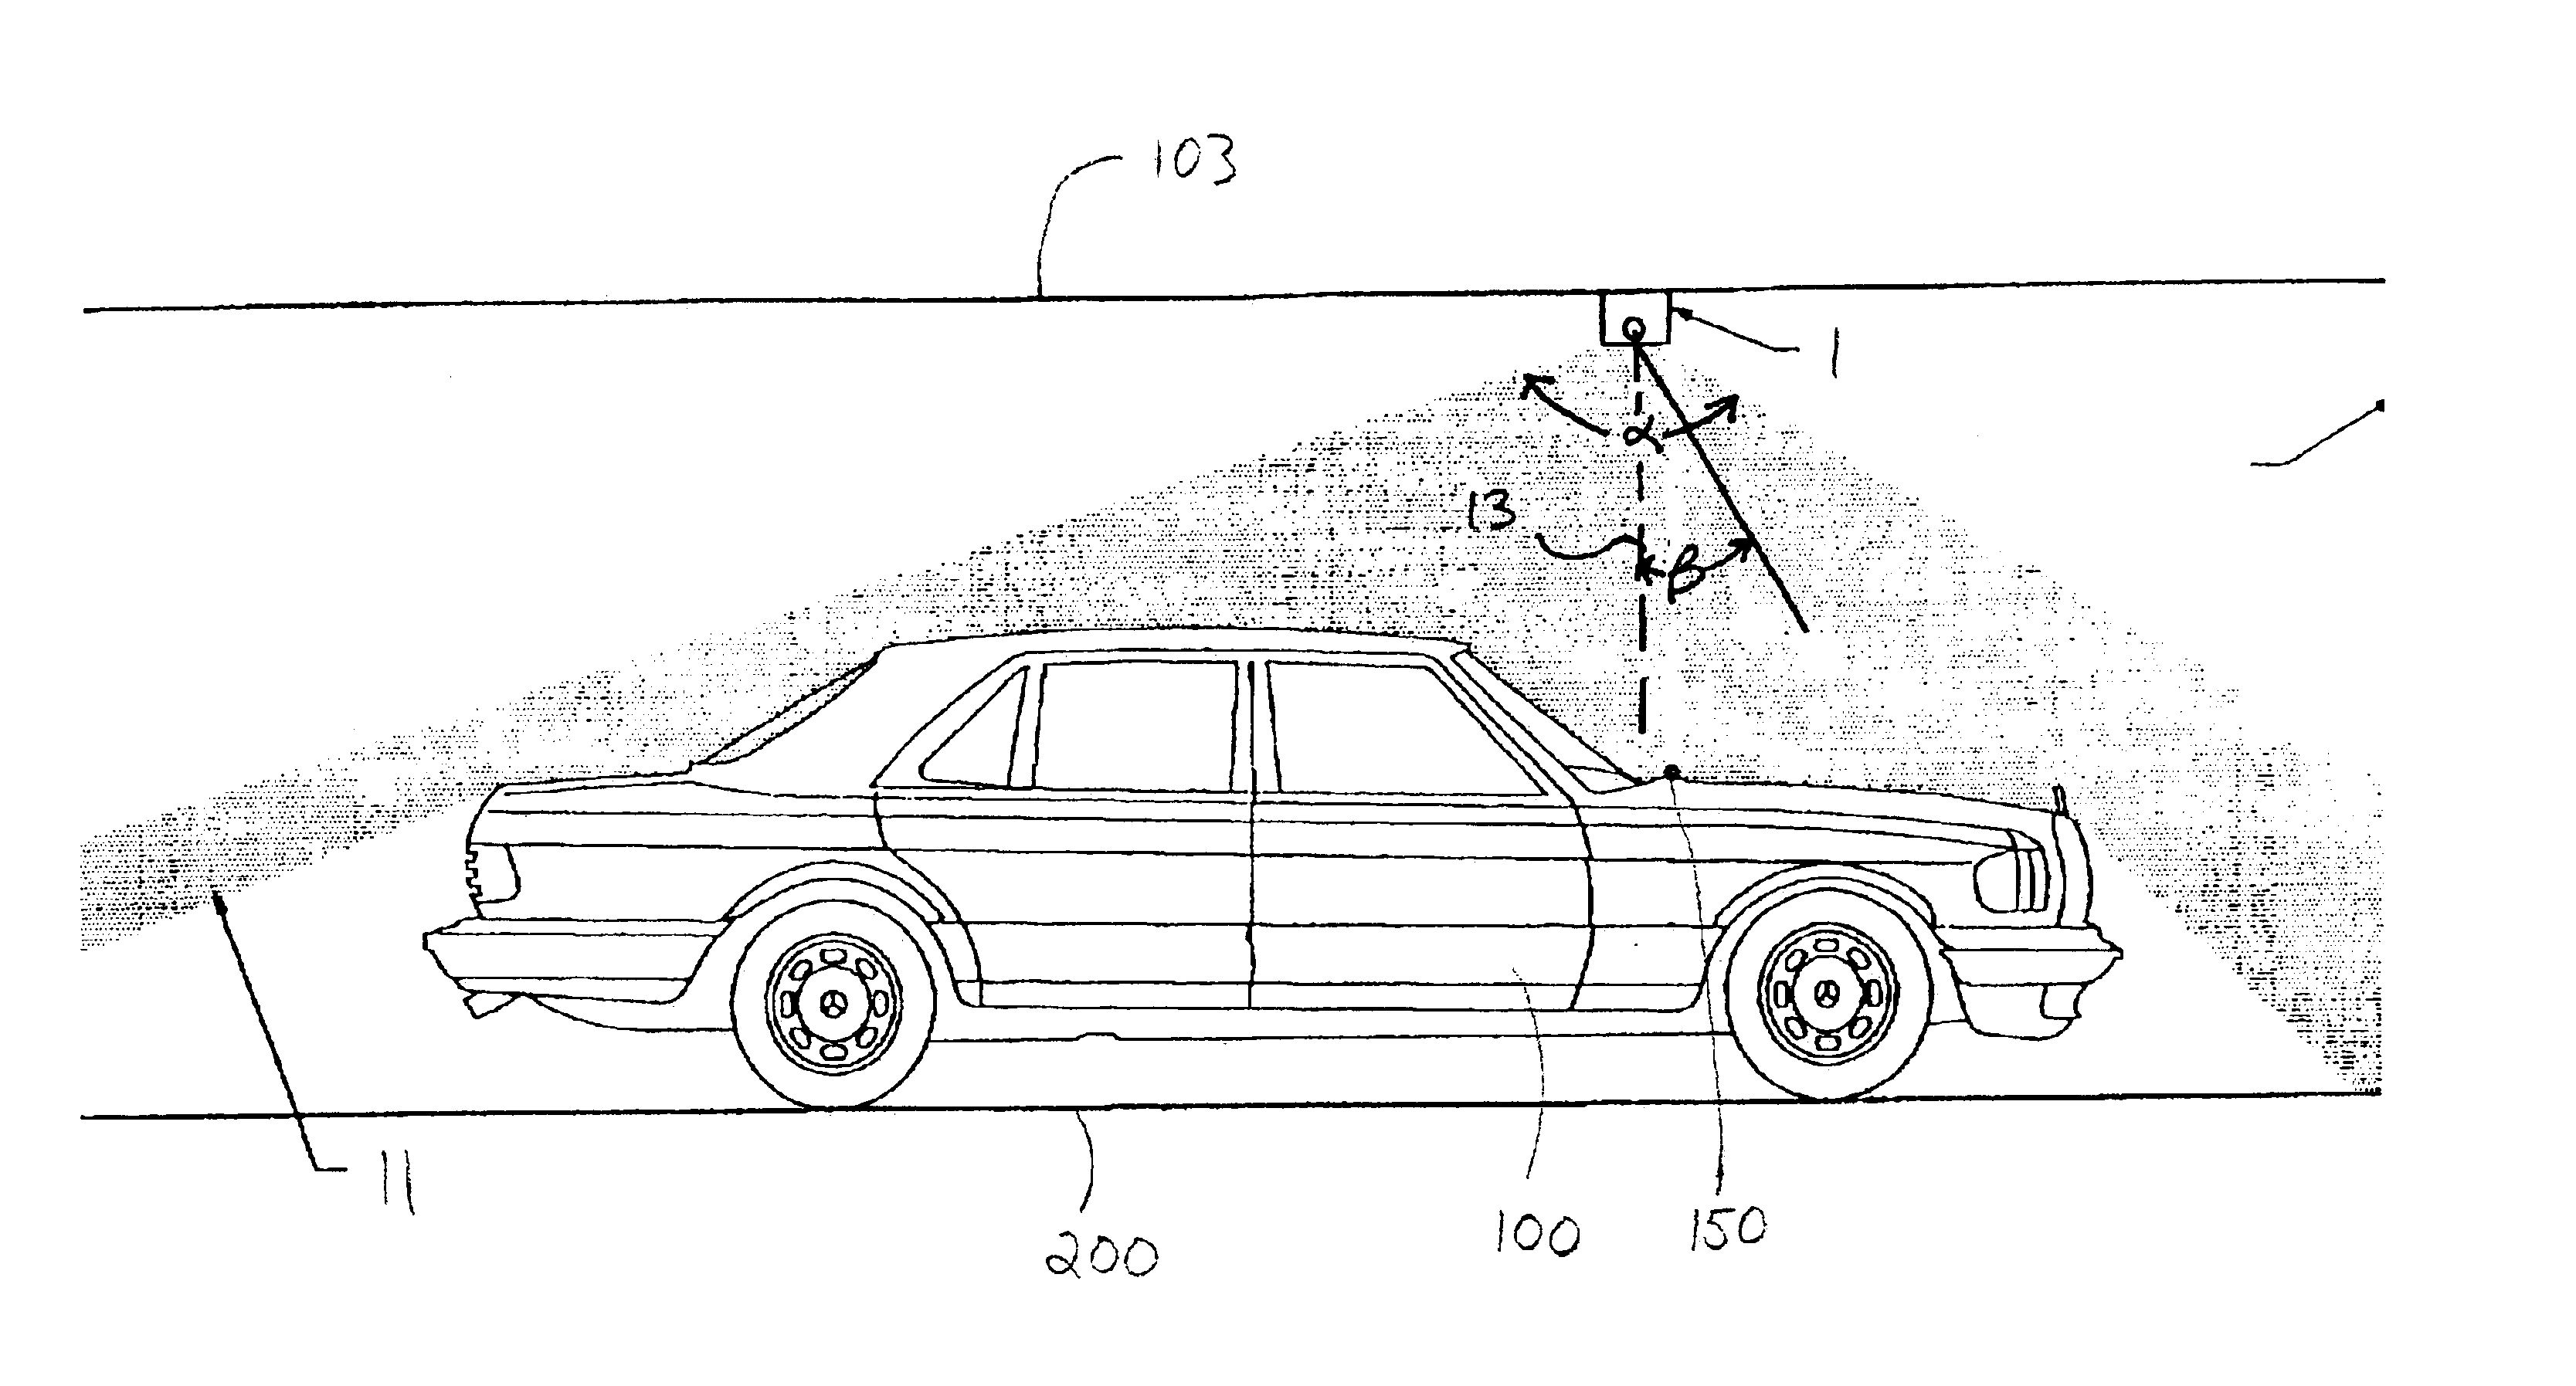 Laser device for guiding a vehicle